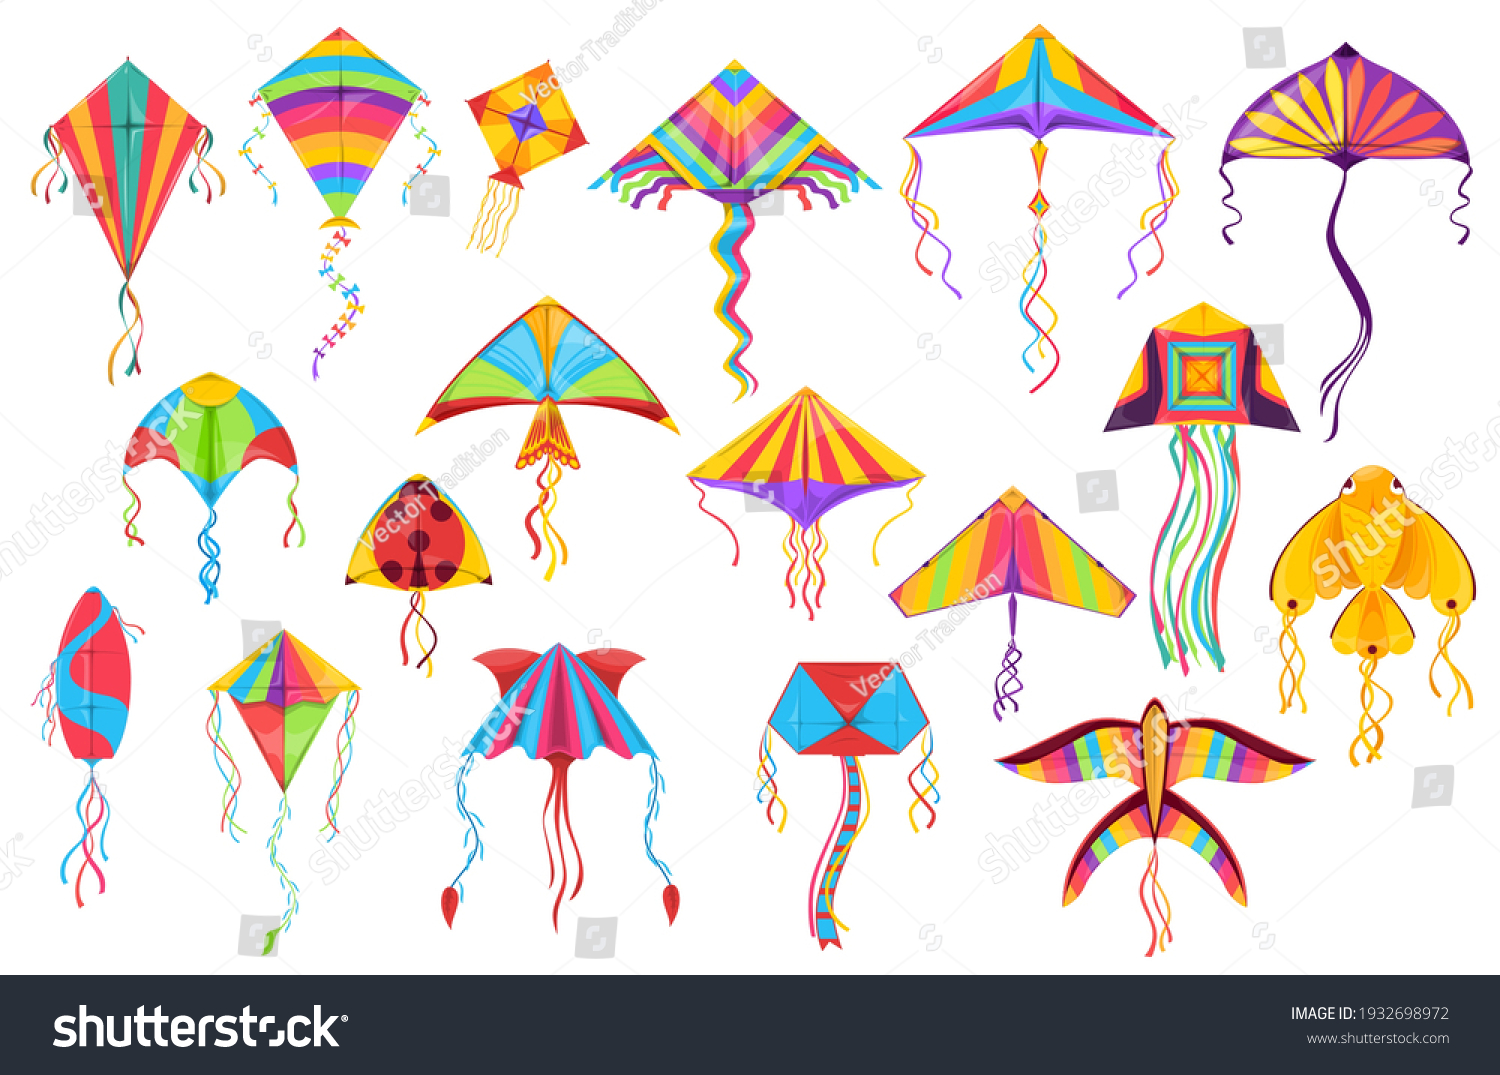 SVG of Kite paper toys cartoon vector of flying wind toys for summer children games and outdoor activity. Kites with colorful strings, tails and ornaments in shape of butterfly, bird, fish and ladybird svg